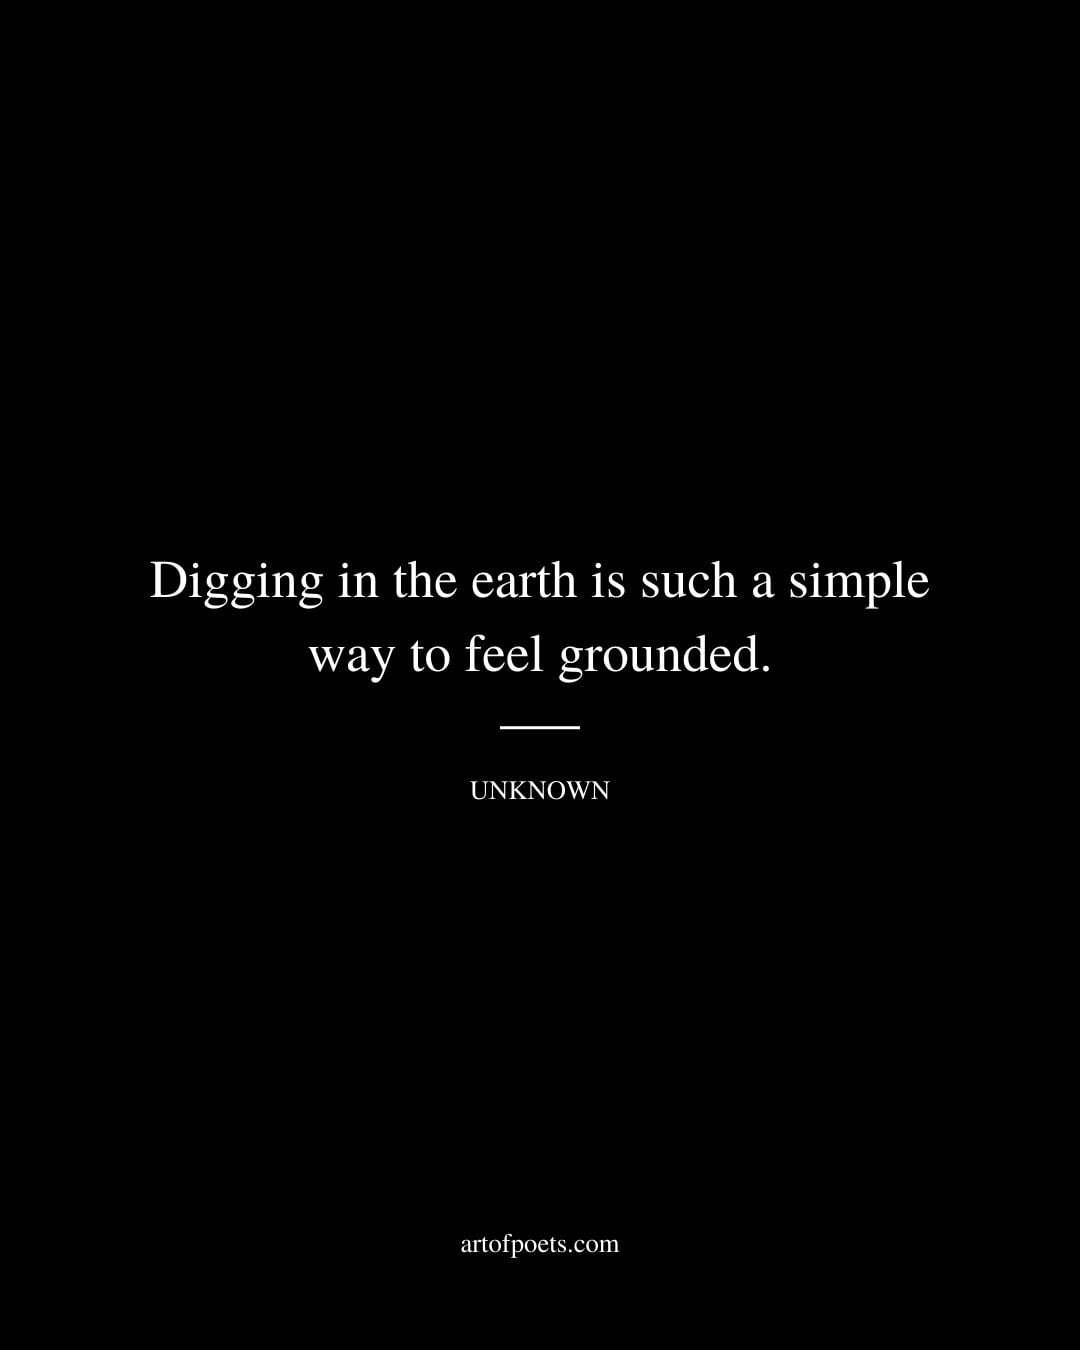 Digging in the earth is such a simple way to feel grounded. Author Unknown